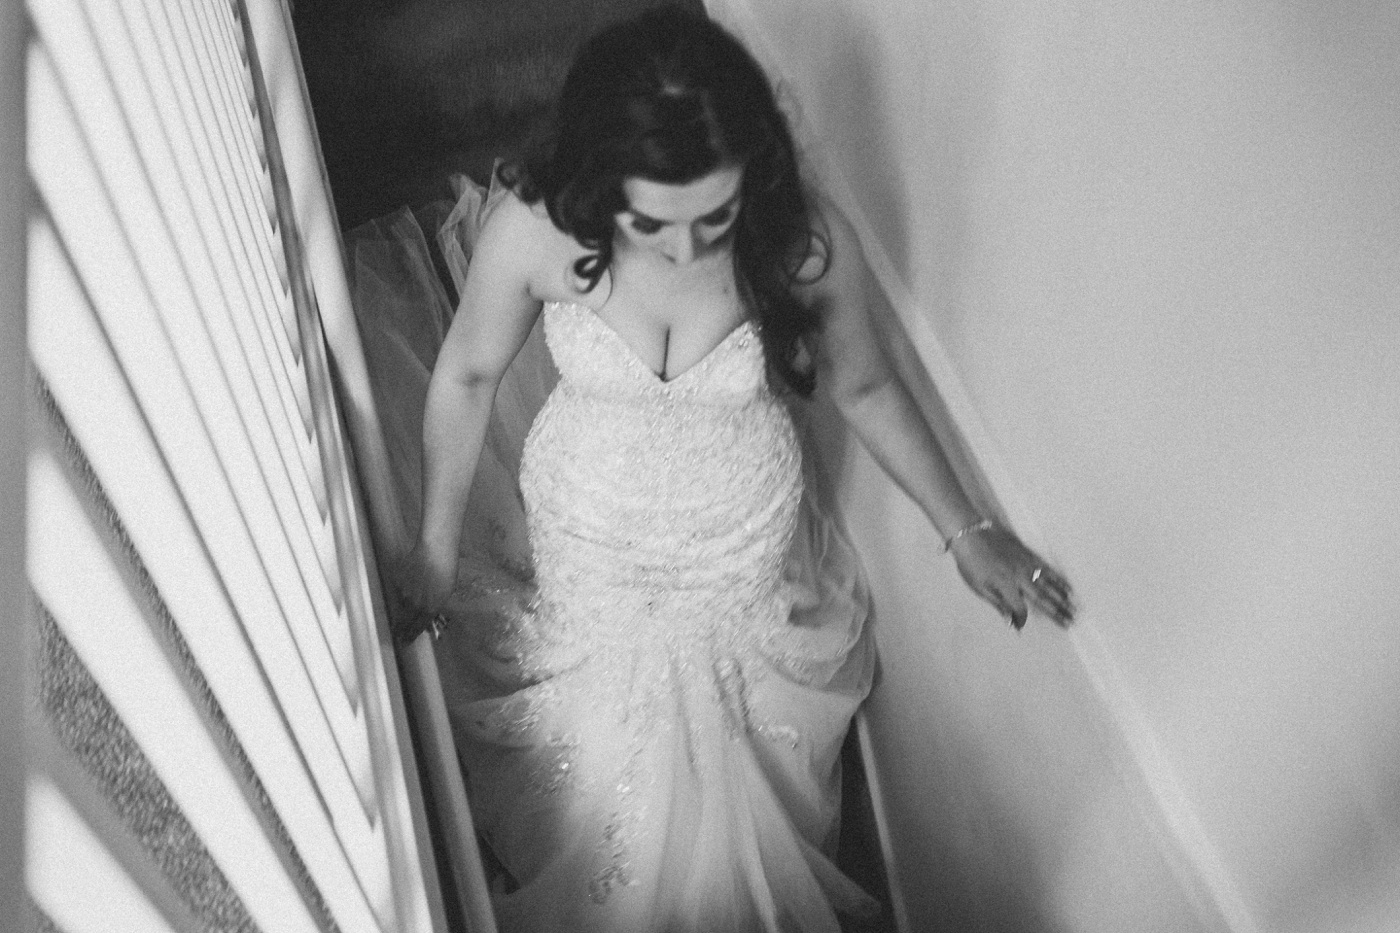 bride going down stairs